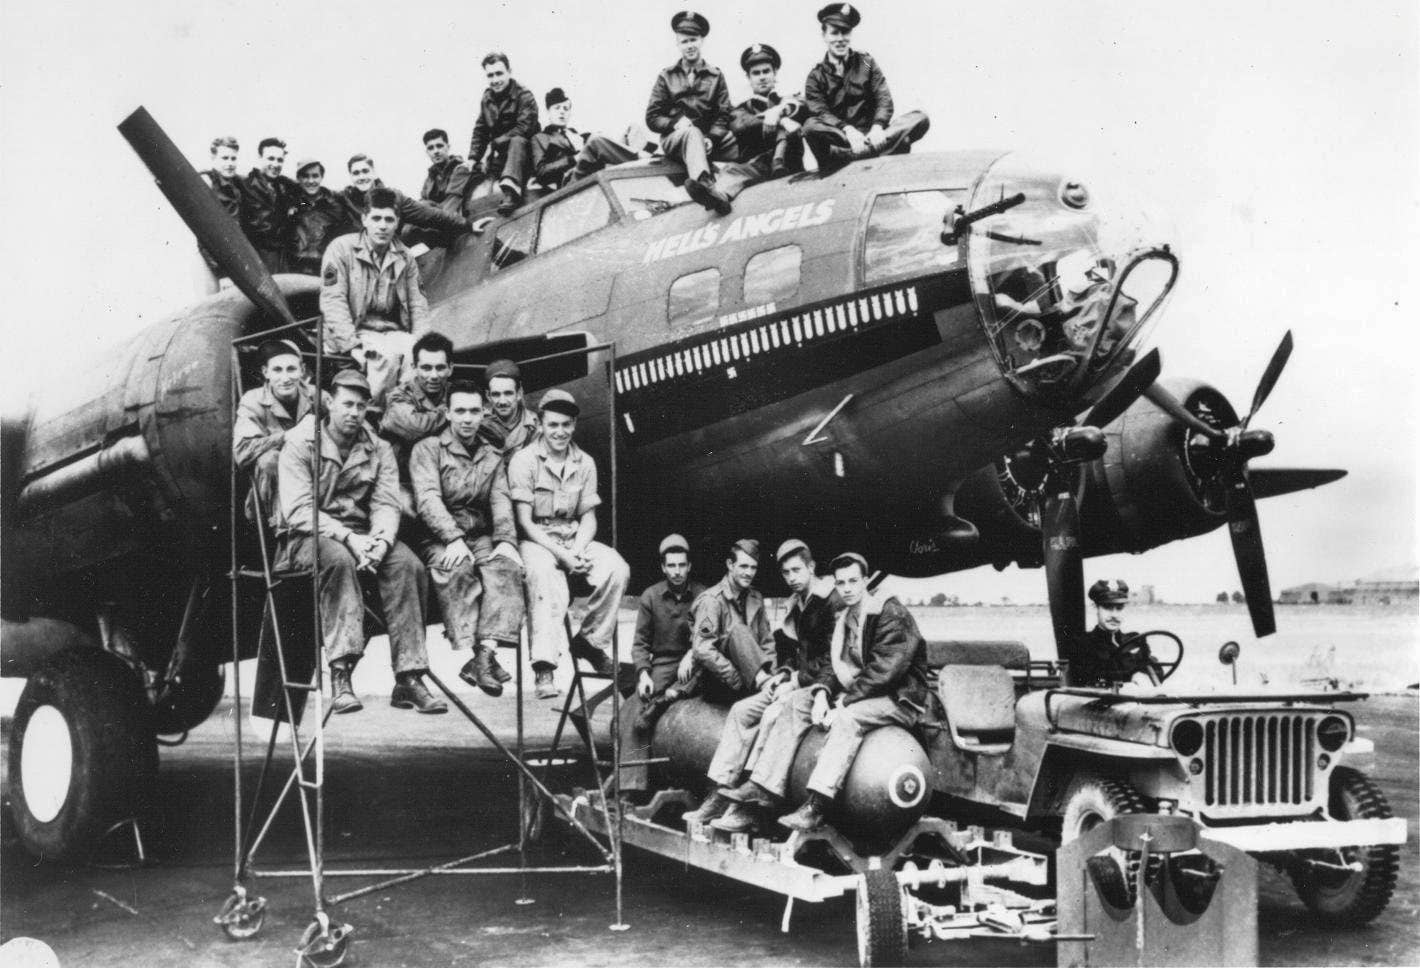 The crew of the 358th Bomb Squadron Boeing B-17F 'Hell's Angels' completed its 25th mission on May 13, 1943.